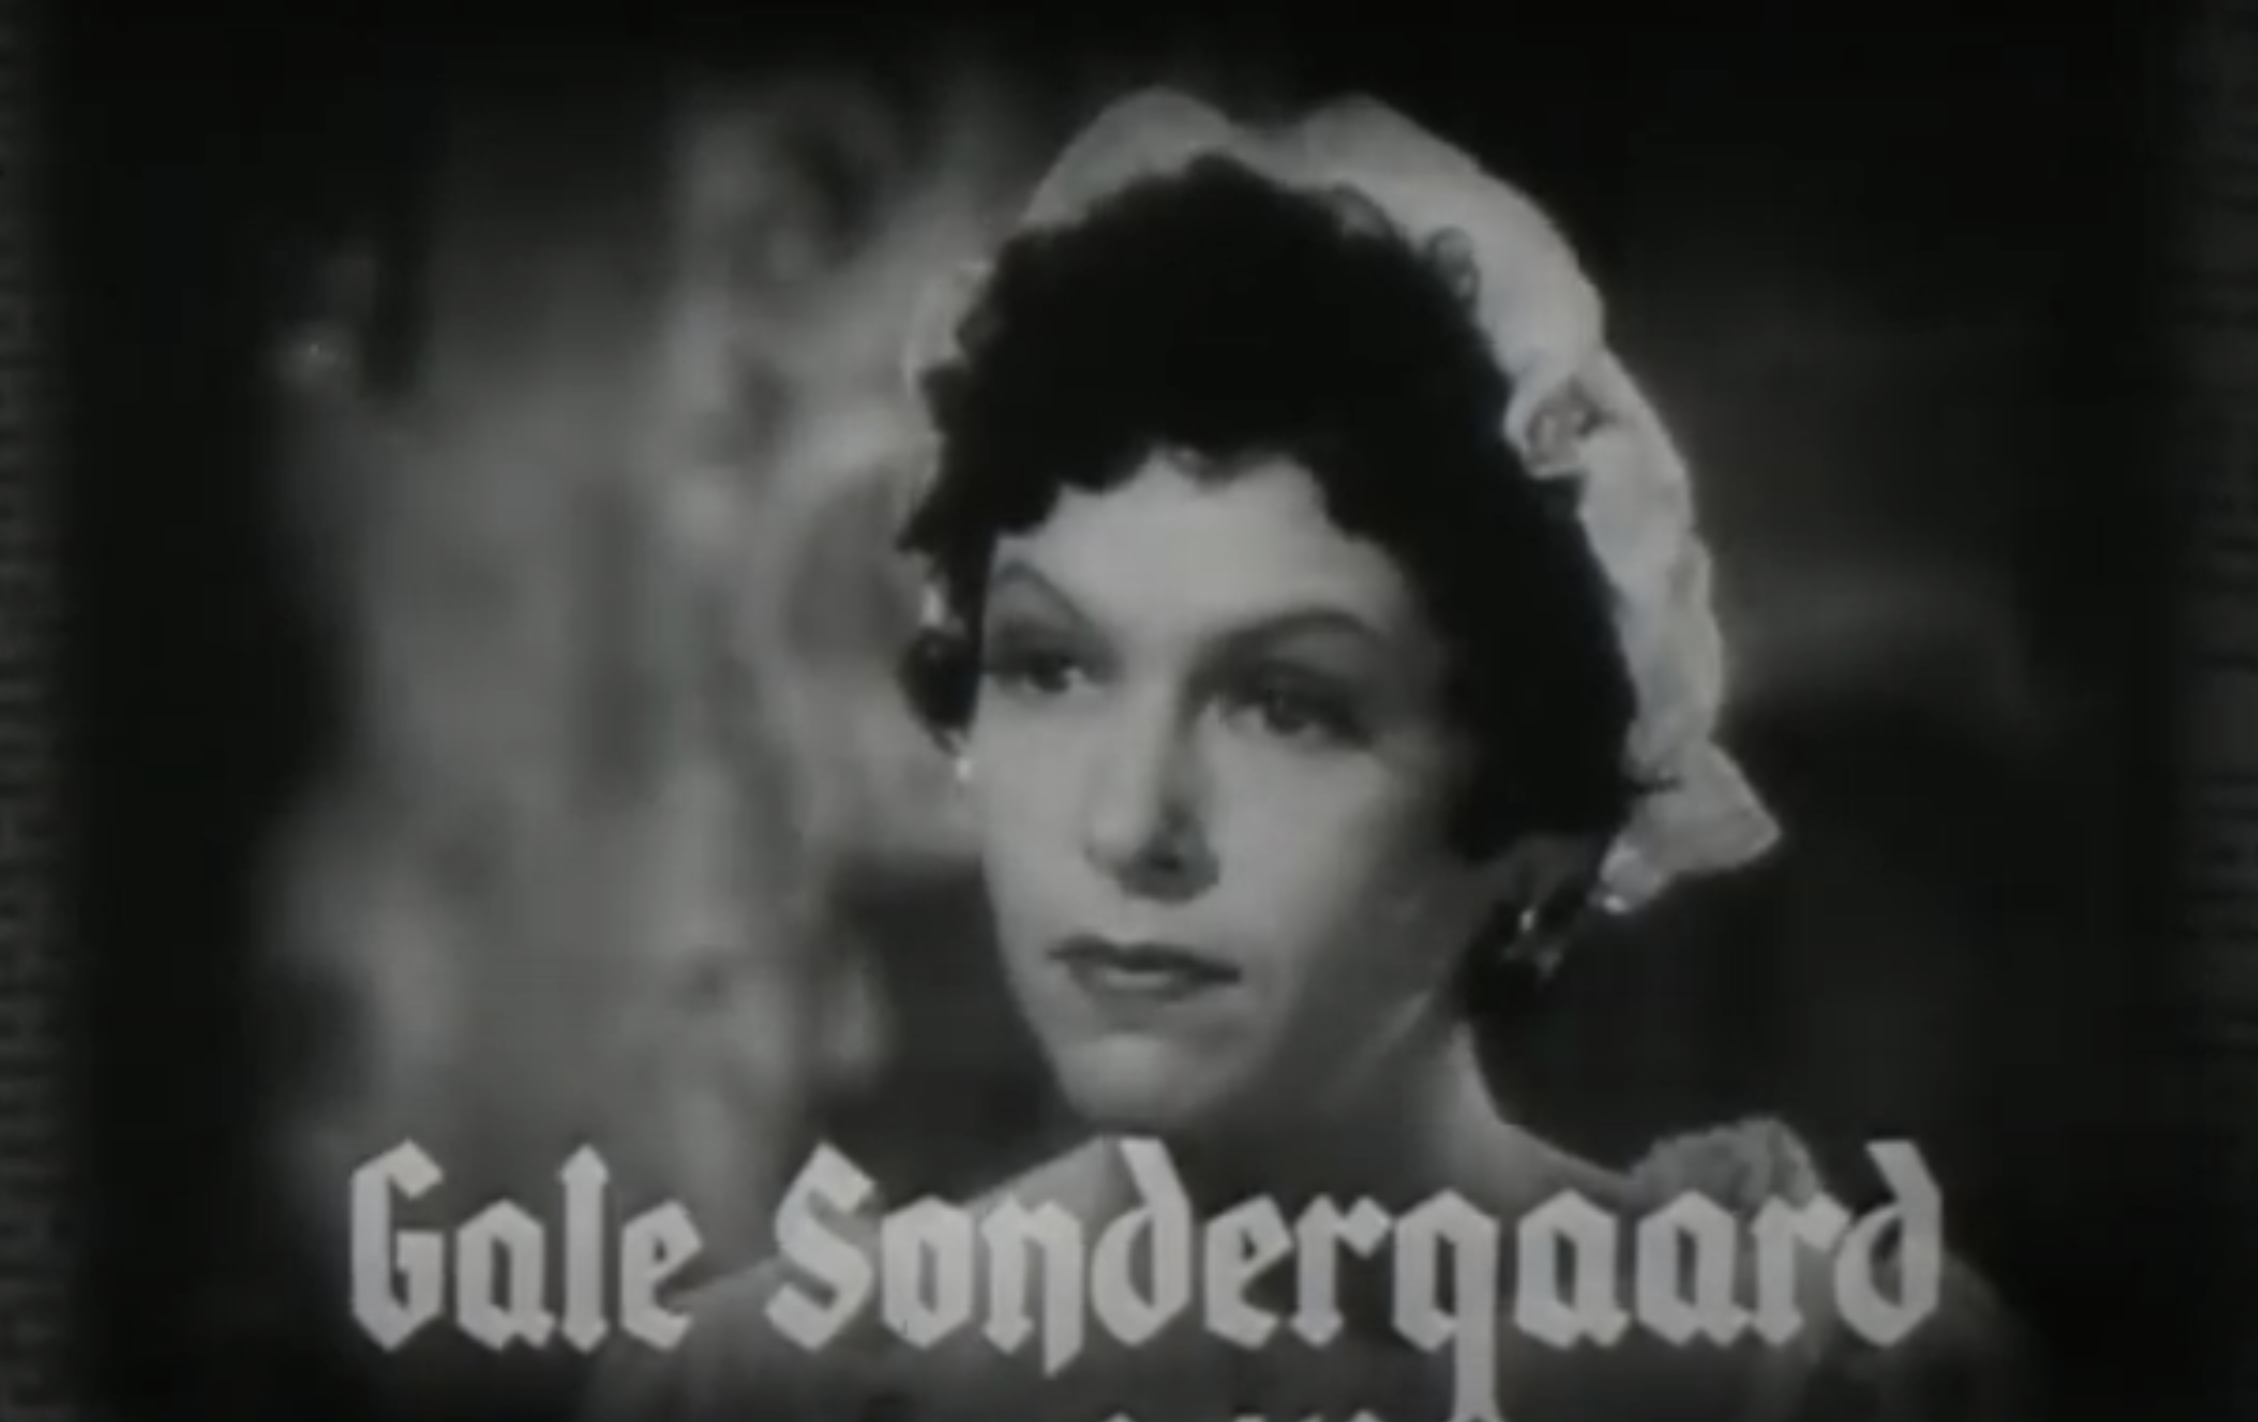 Actress Gale Sondergaard in a vintage film still, wearing a bonnet and looking to the side